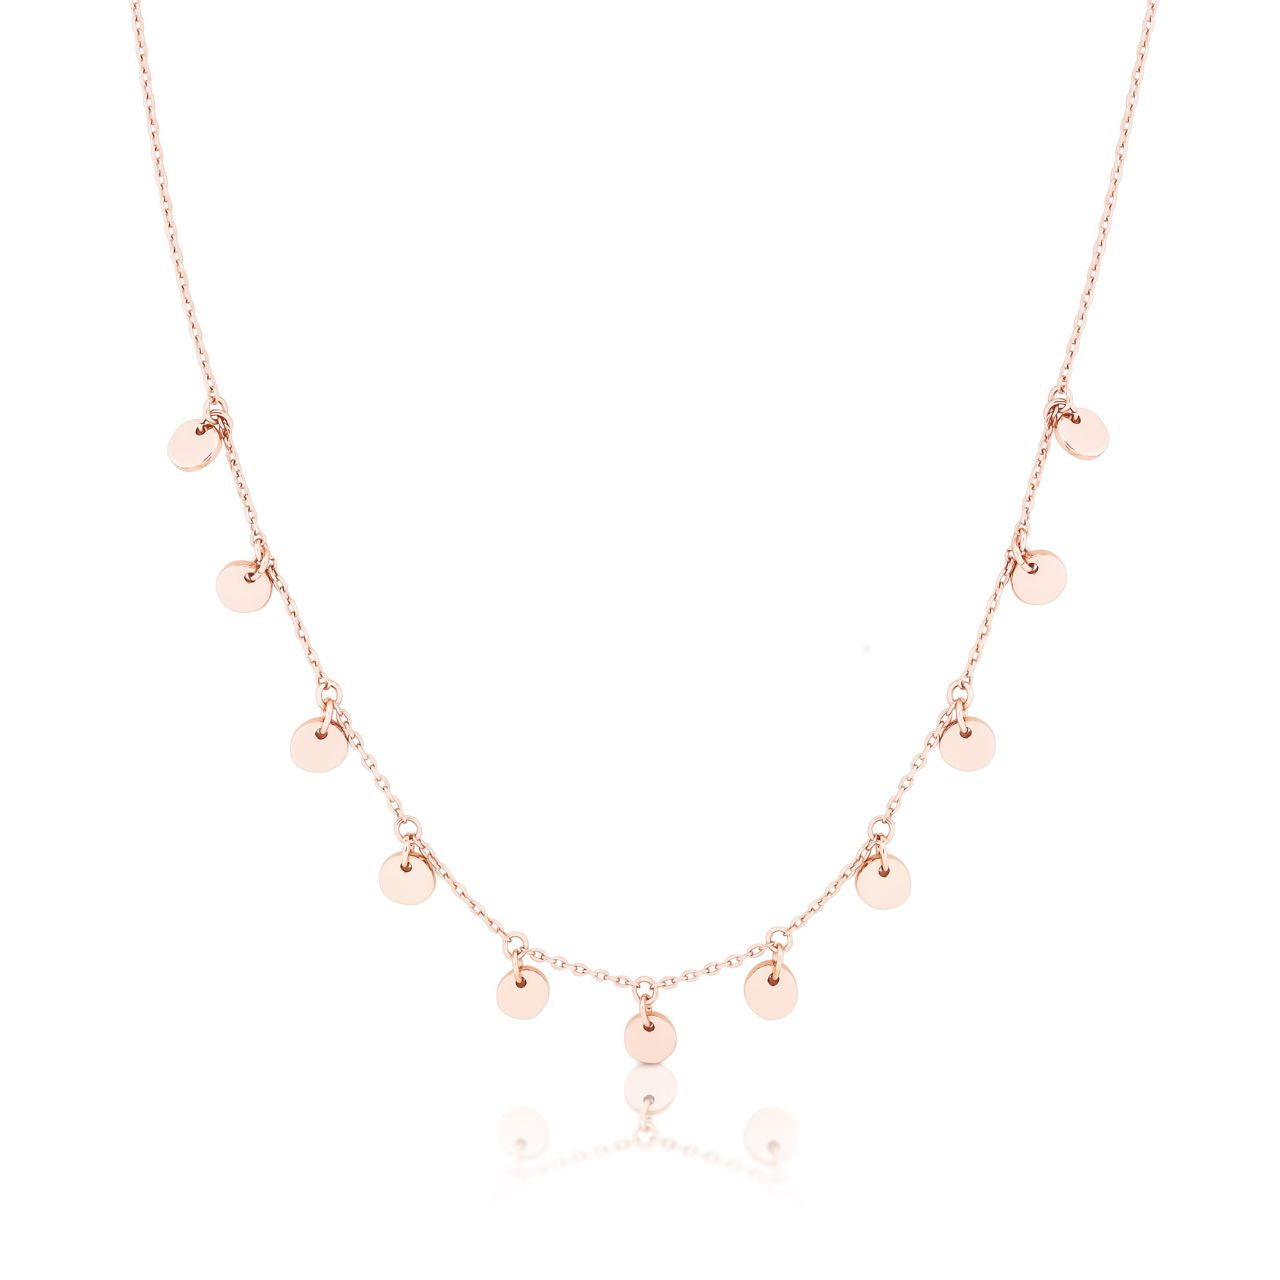 Romi Dublin Mini Disc Chain Necklace Rose Gold  This easy-to-wear jewellery collection was inspired by daughter Romi who loves to style and accessorise. An outfit isn’t complete until the perfect pieces of jewellery and accessories have been selected to enhance it.